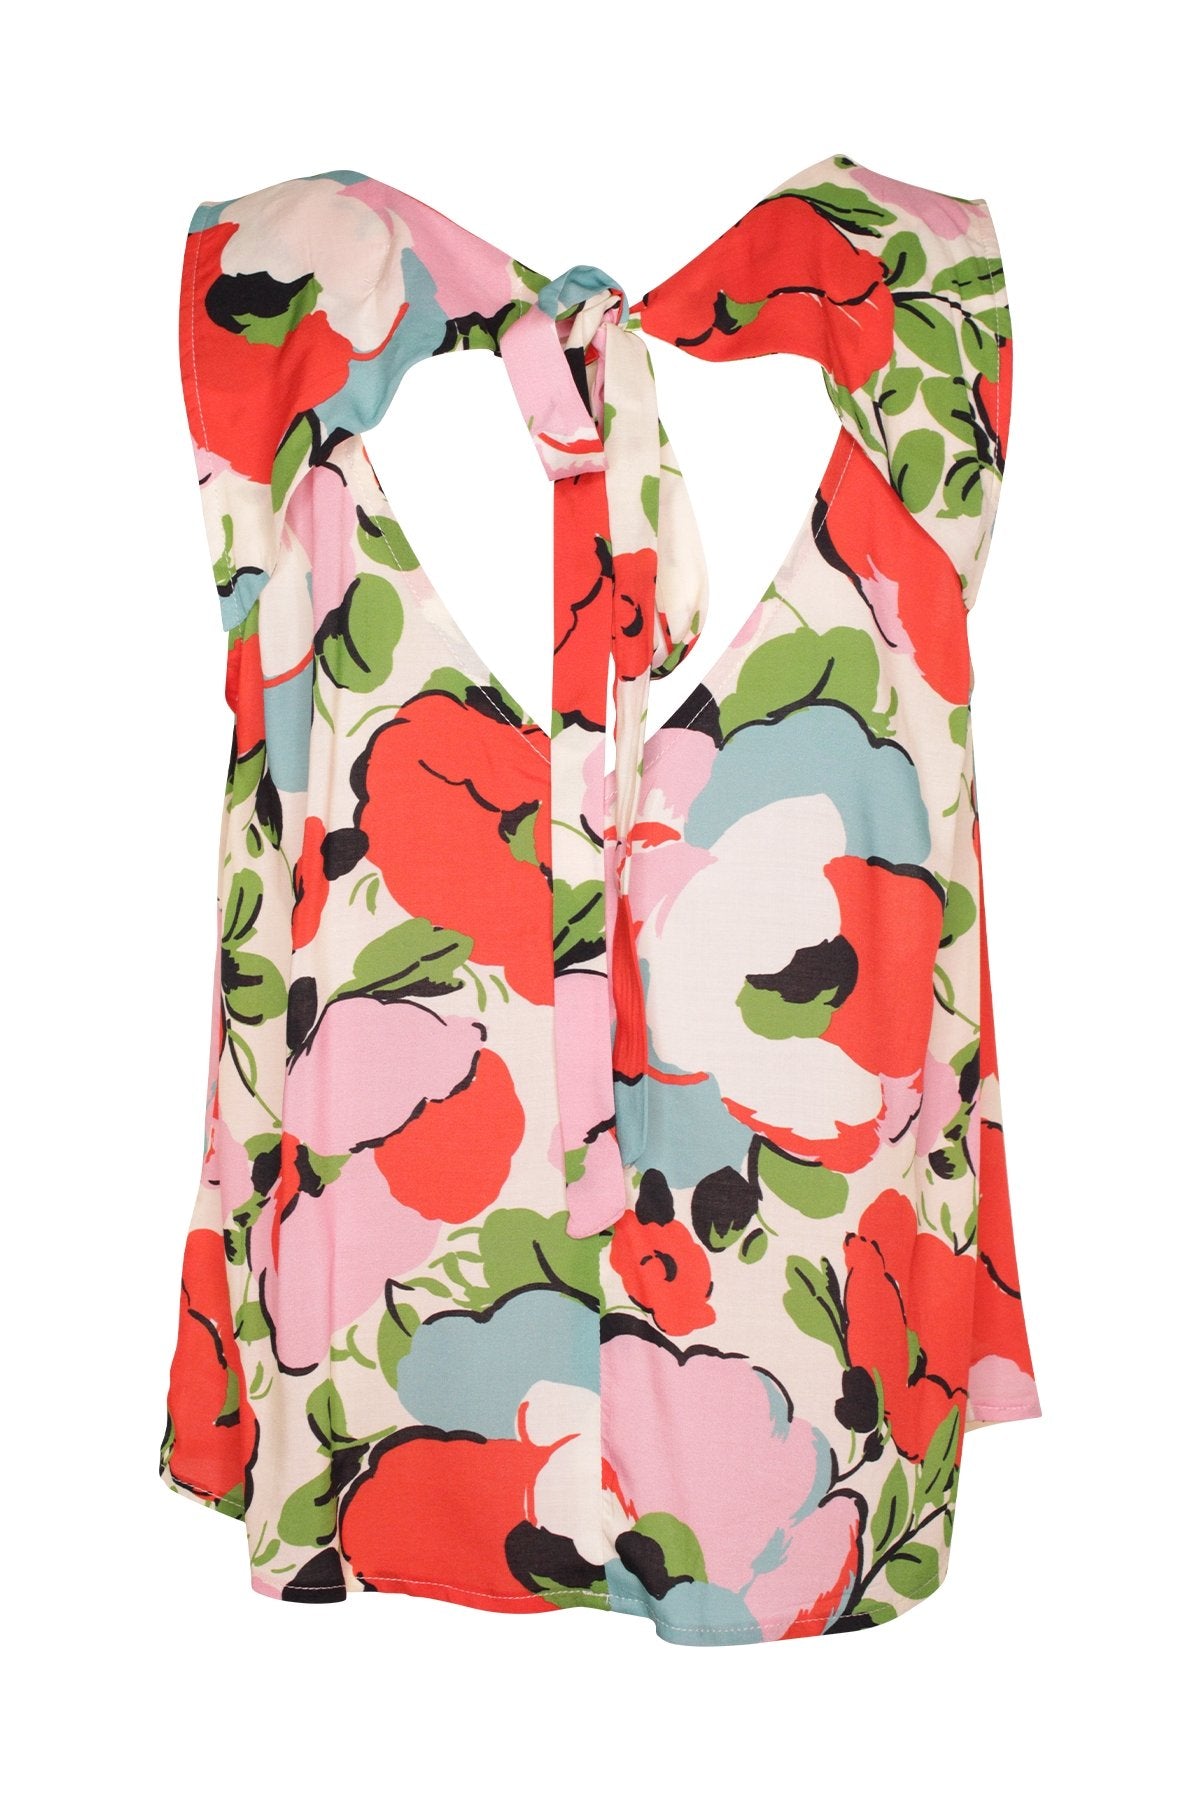 Claudette Sleeveless Blouse in Posey Print - shop-olivia.com